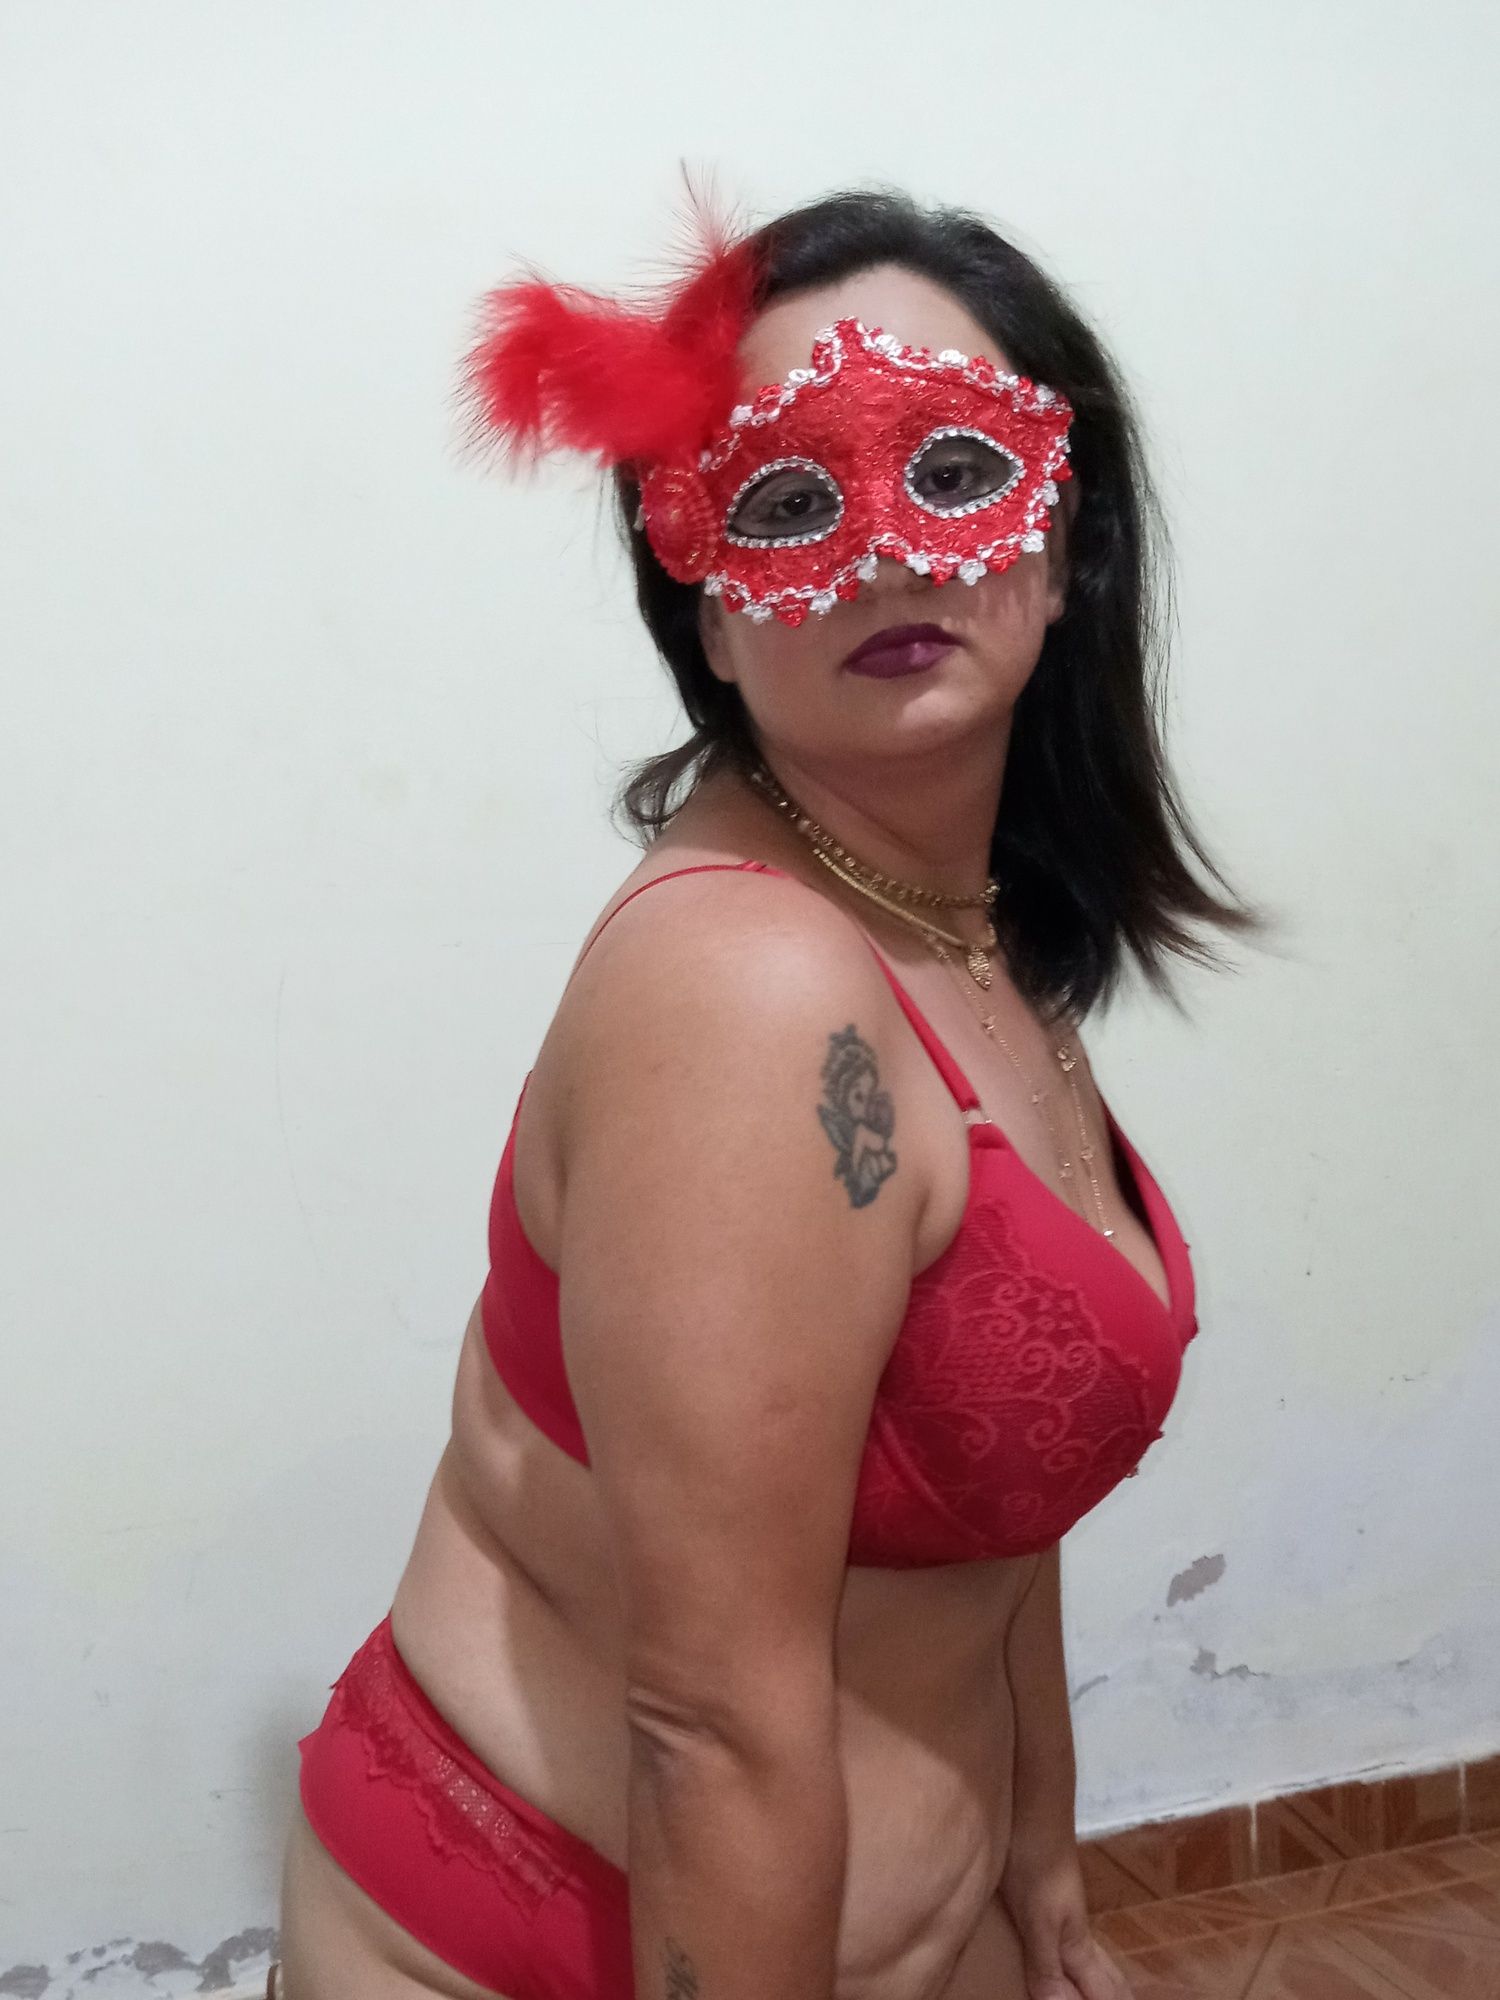 SHOWING OFF WEARING RED LINGERIE... #2